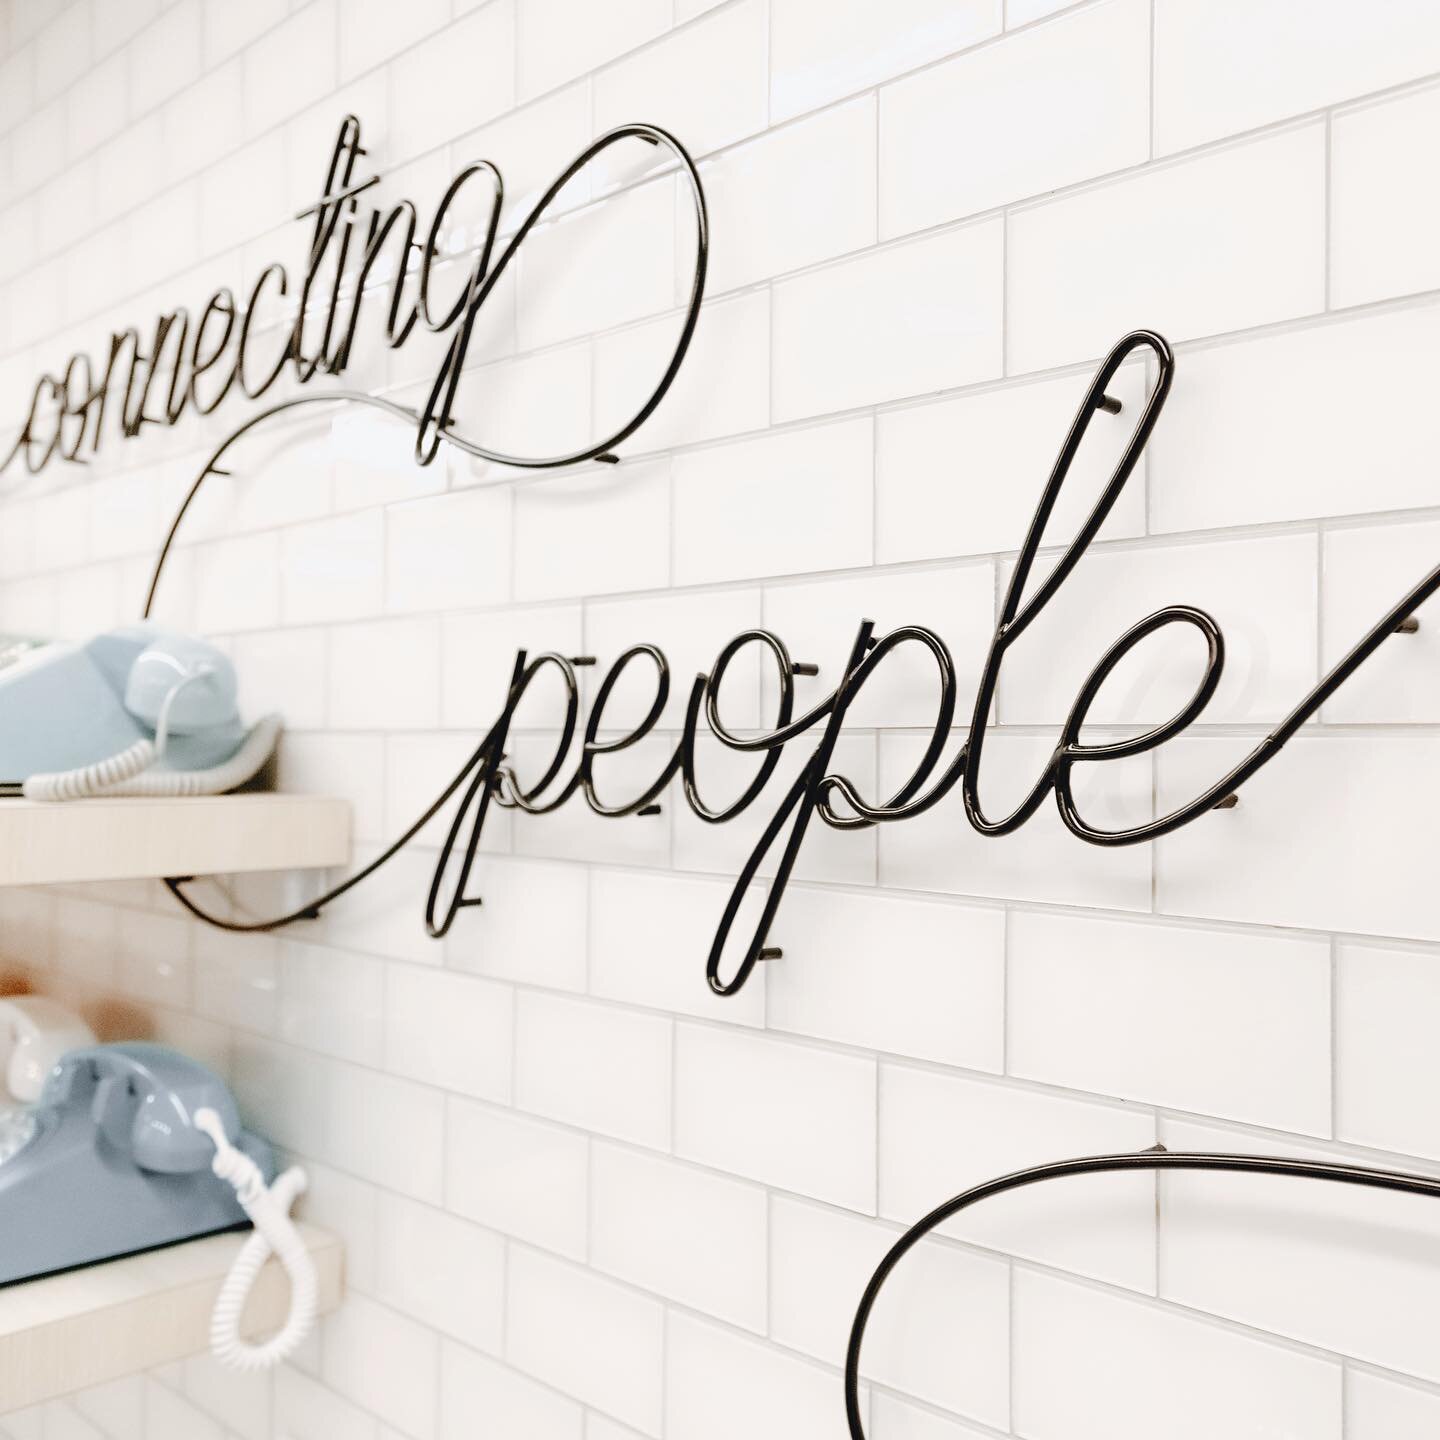 #Branding Spotlight 🌟 A colorful collection of rotary-style telephones serves as a nod to the heritage of @telhiocu as The Columbus Telephone Company. The phrase &quot;Connecting People Since 1934&quot; is wound throughout in copper tubing, alluding